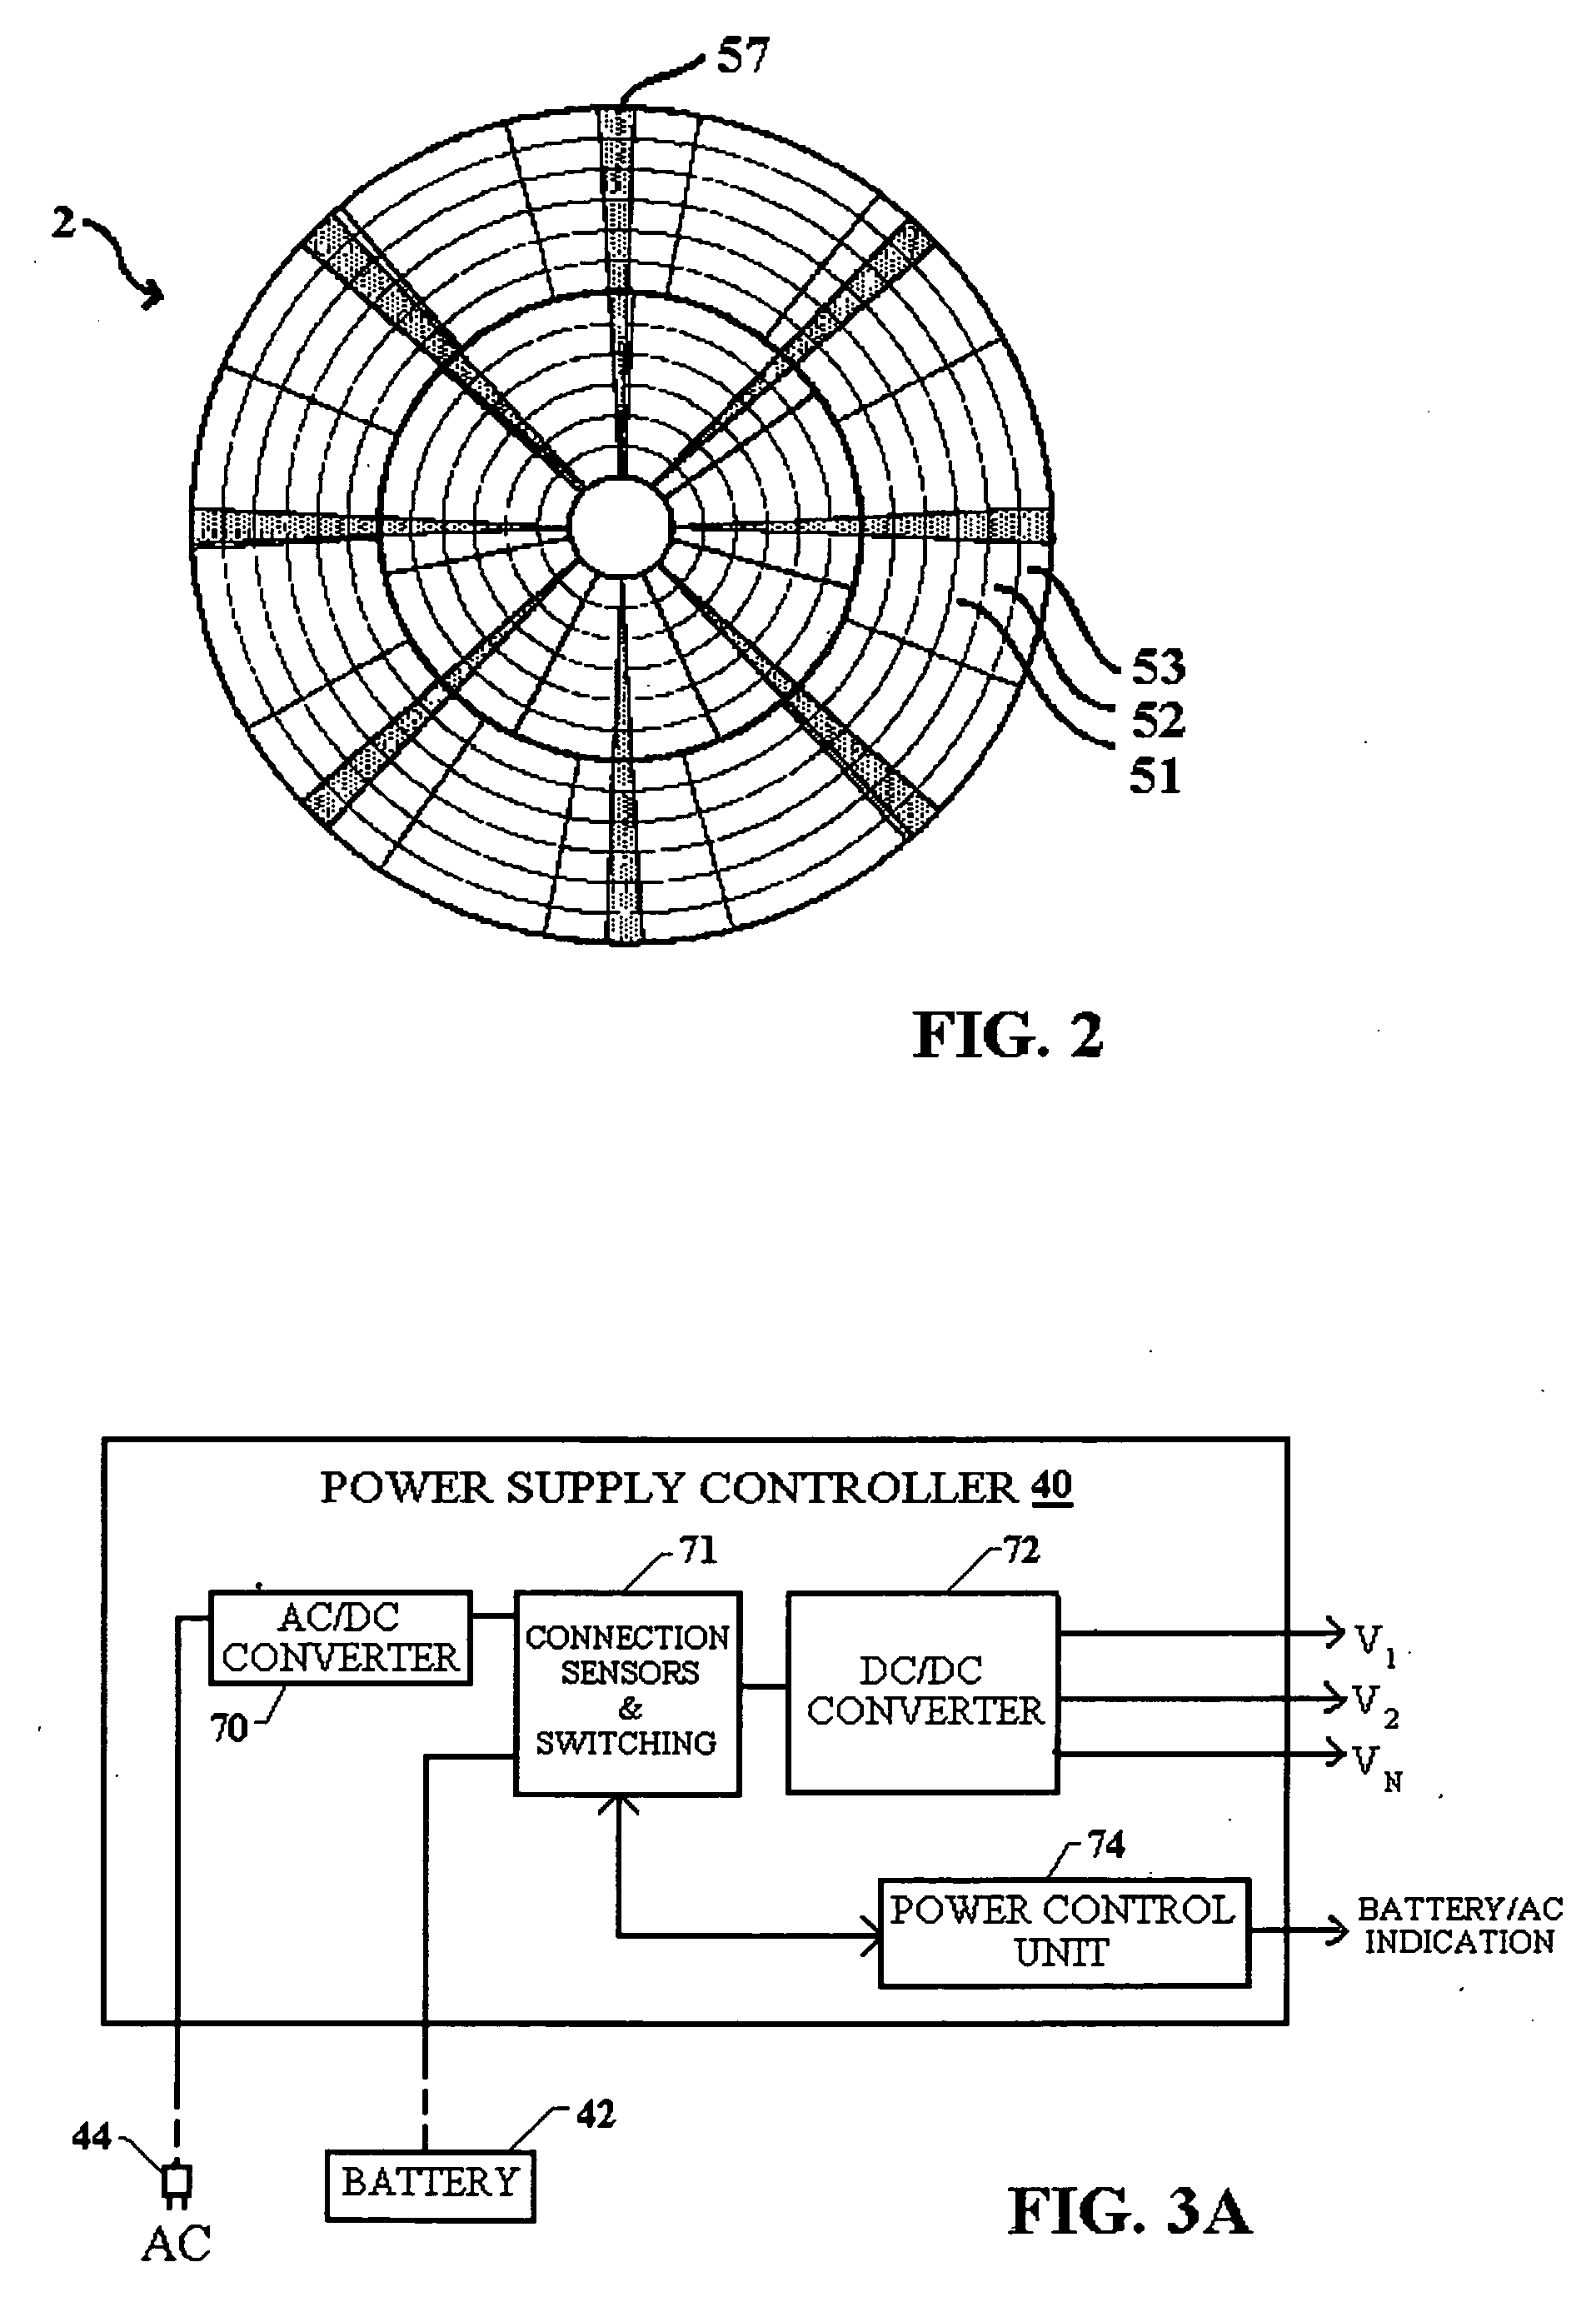 Variable power consumption levels in a hard disk drive